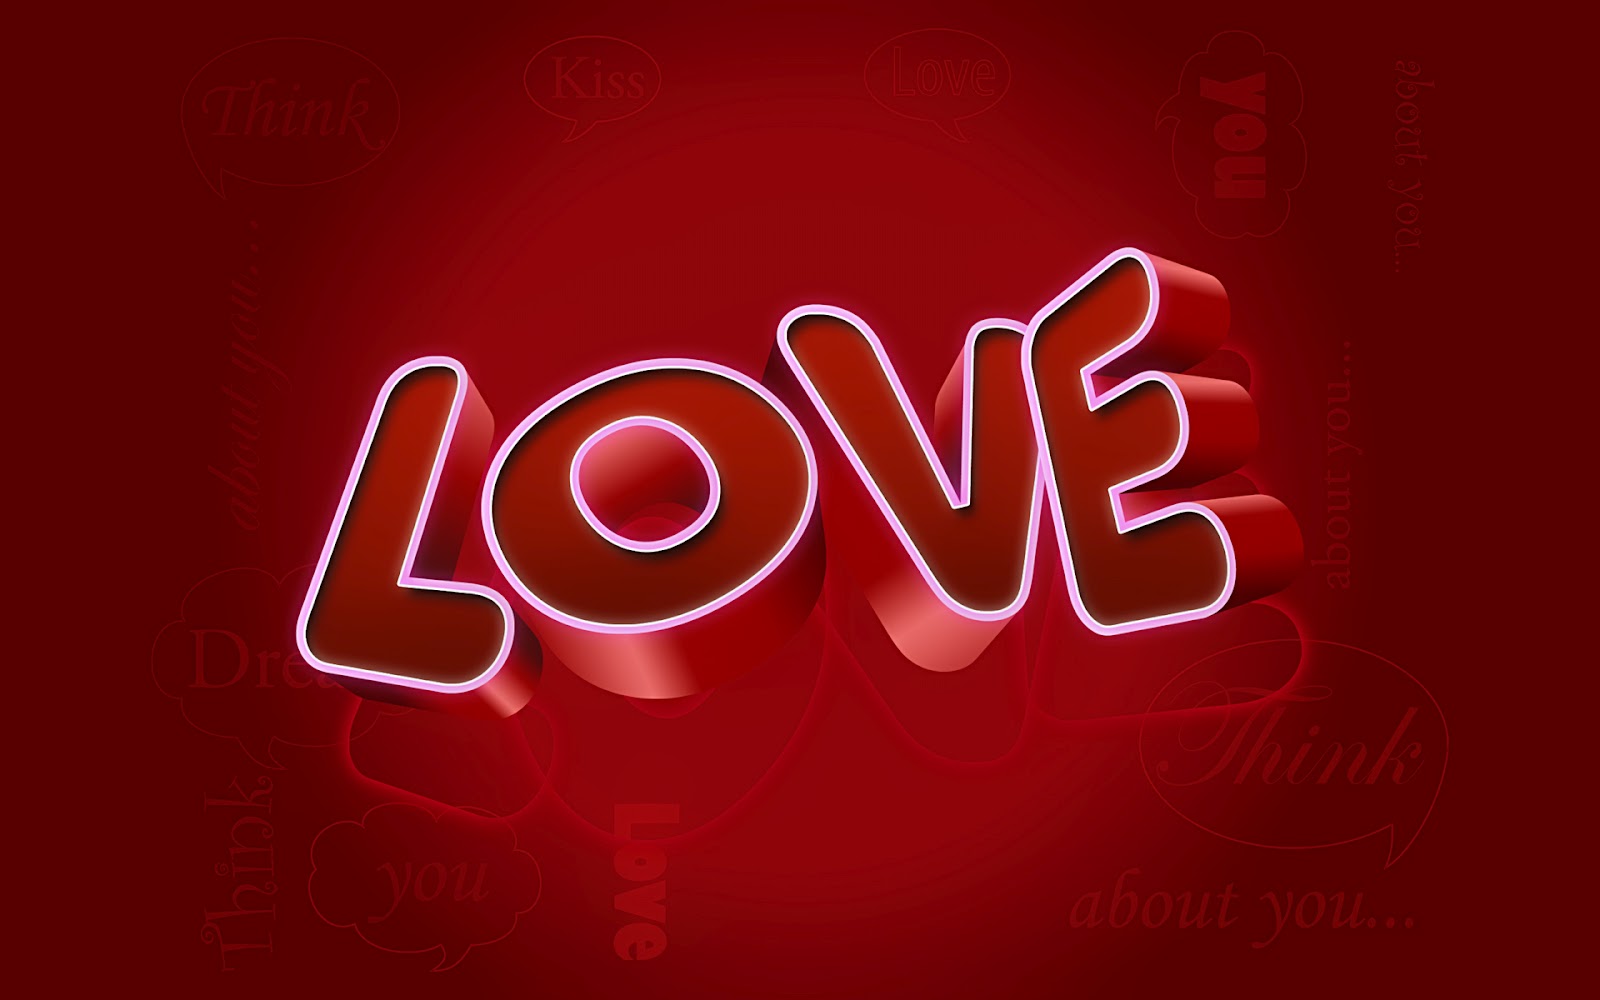 New Latest i love you wallpapers on this valentines day 2016